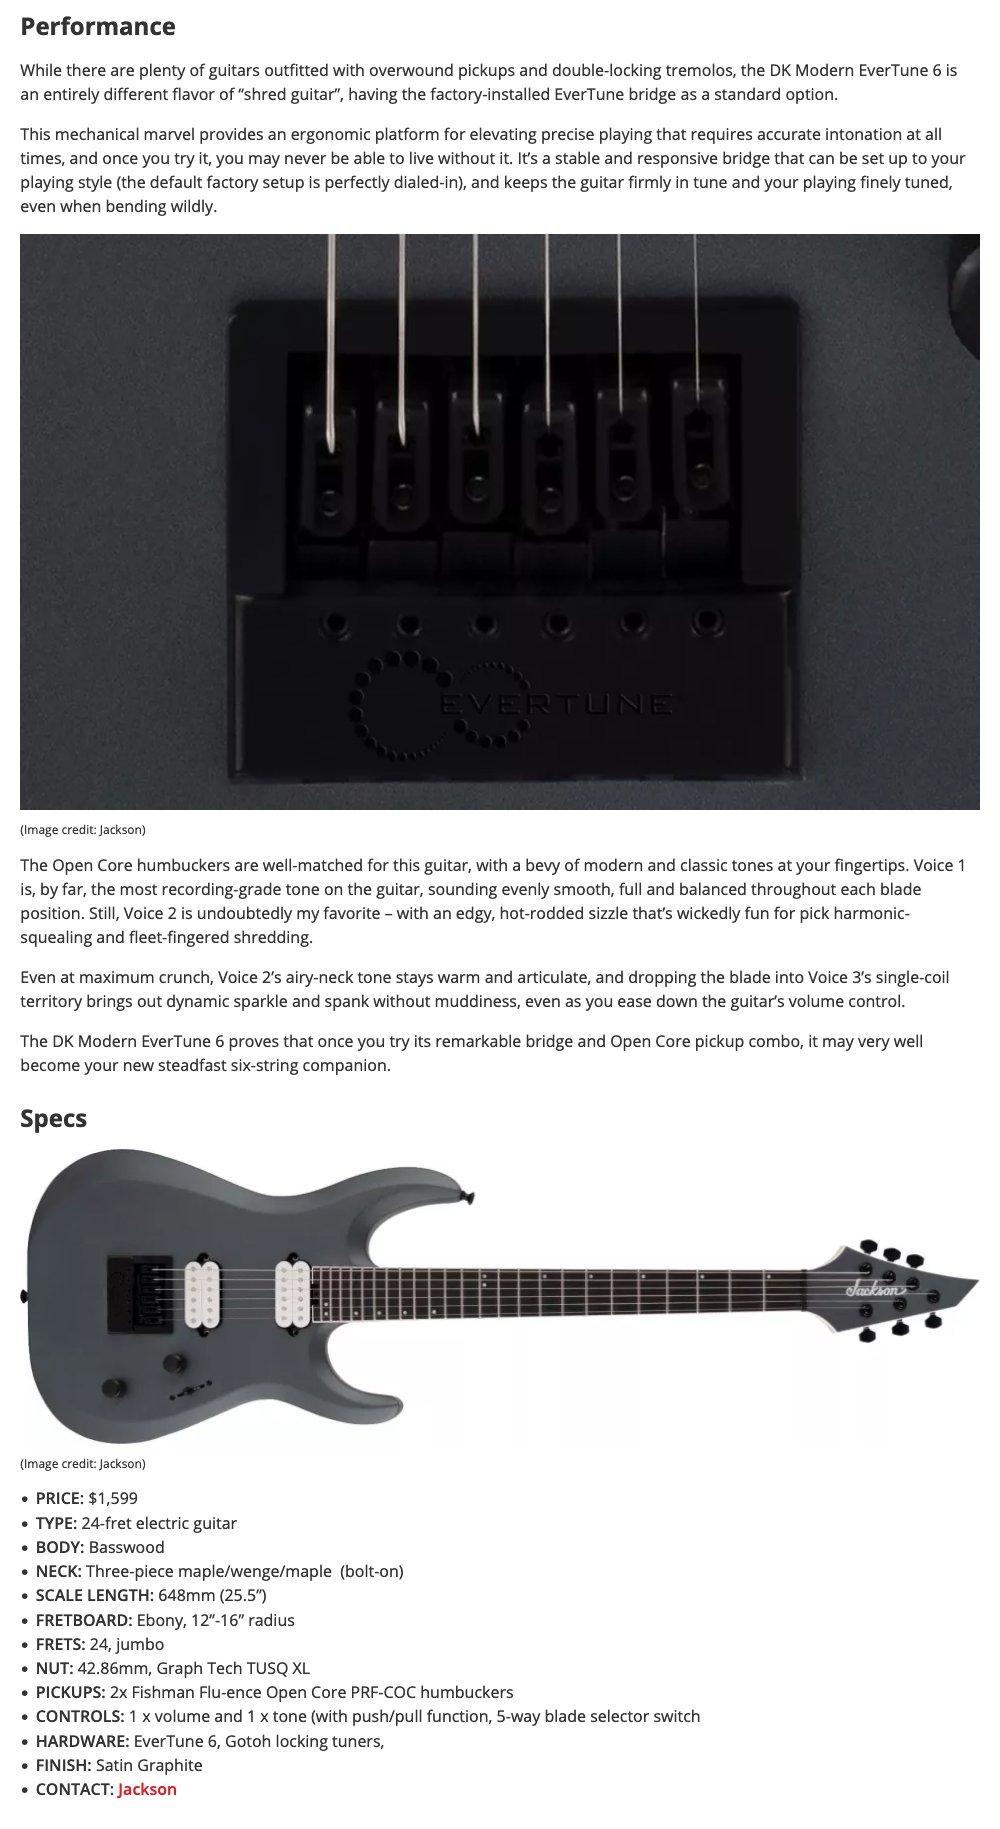 Jackson Pro Series Dinky DK Modern EverTune 6 review in Guitar World Magazine by Paul Riario